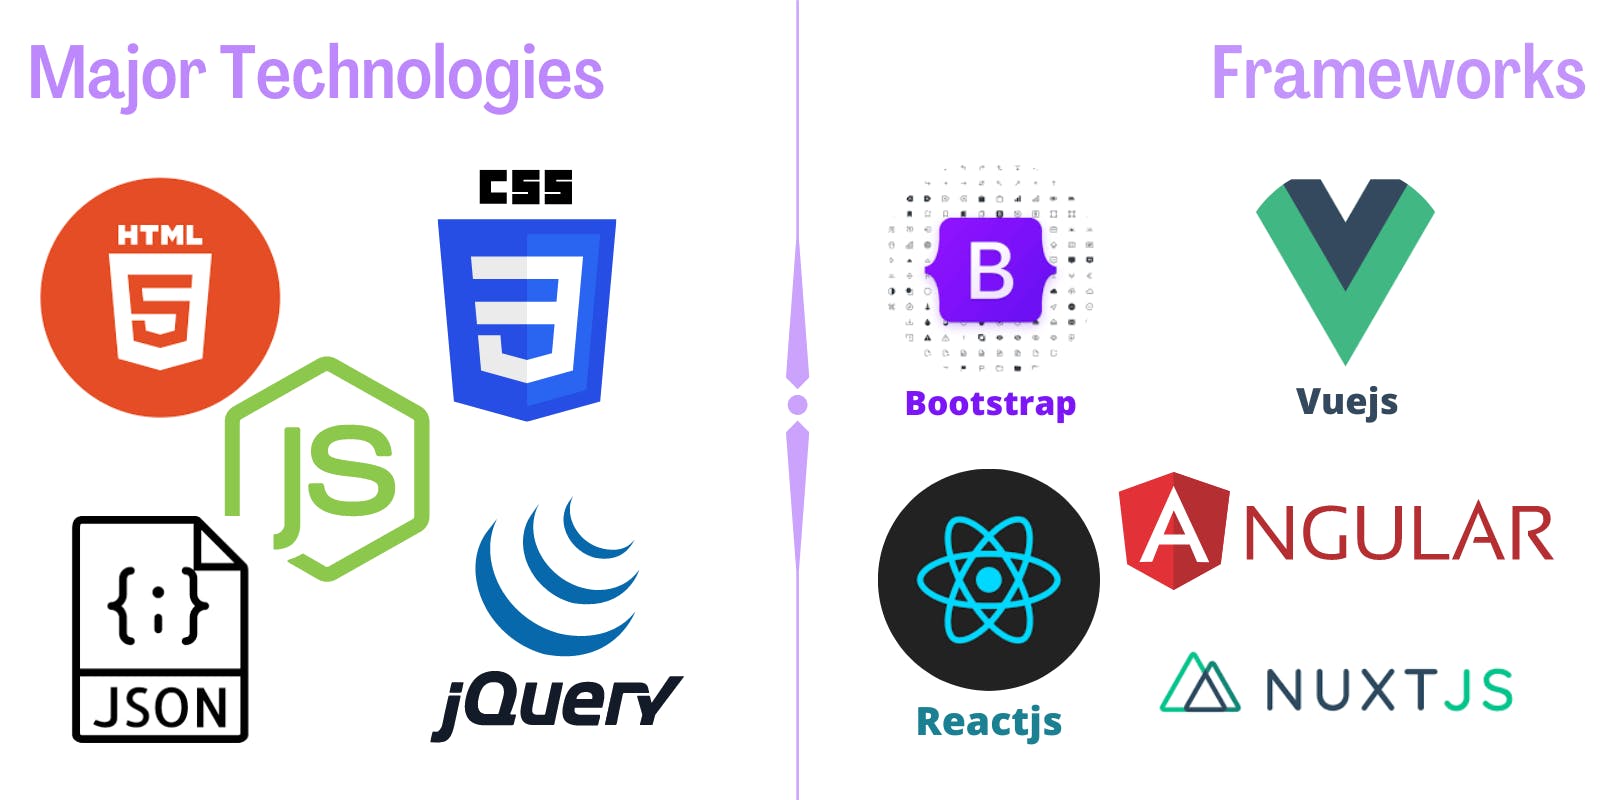 Bootstrap (2).png